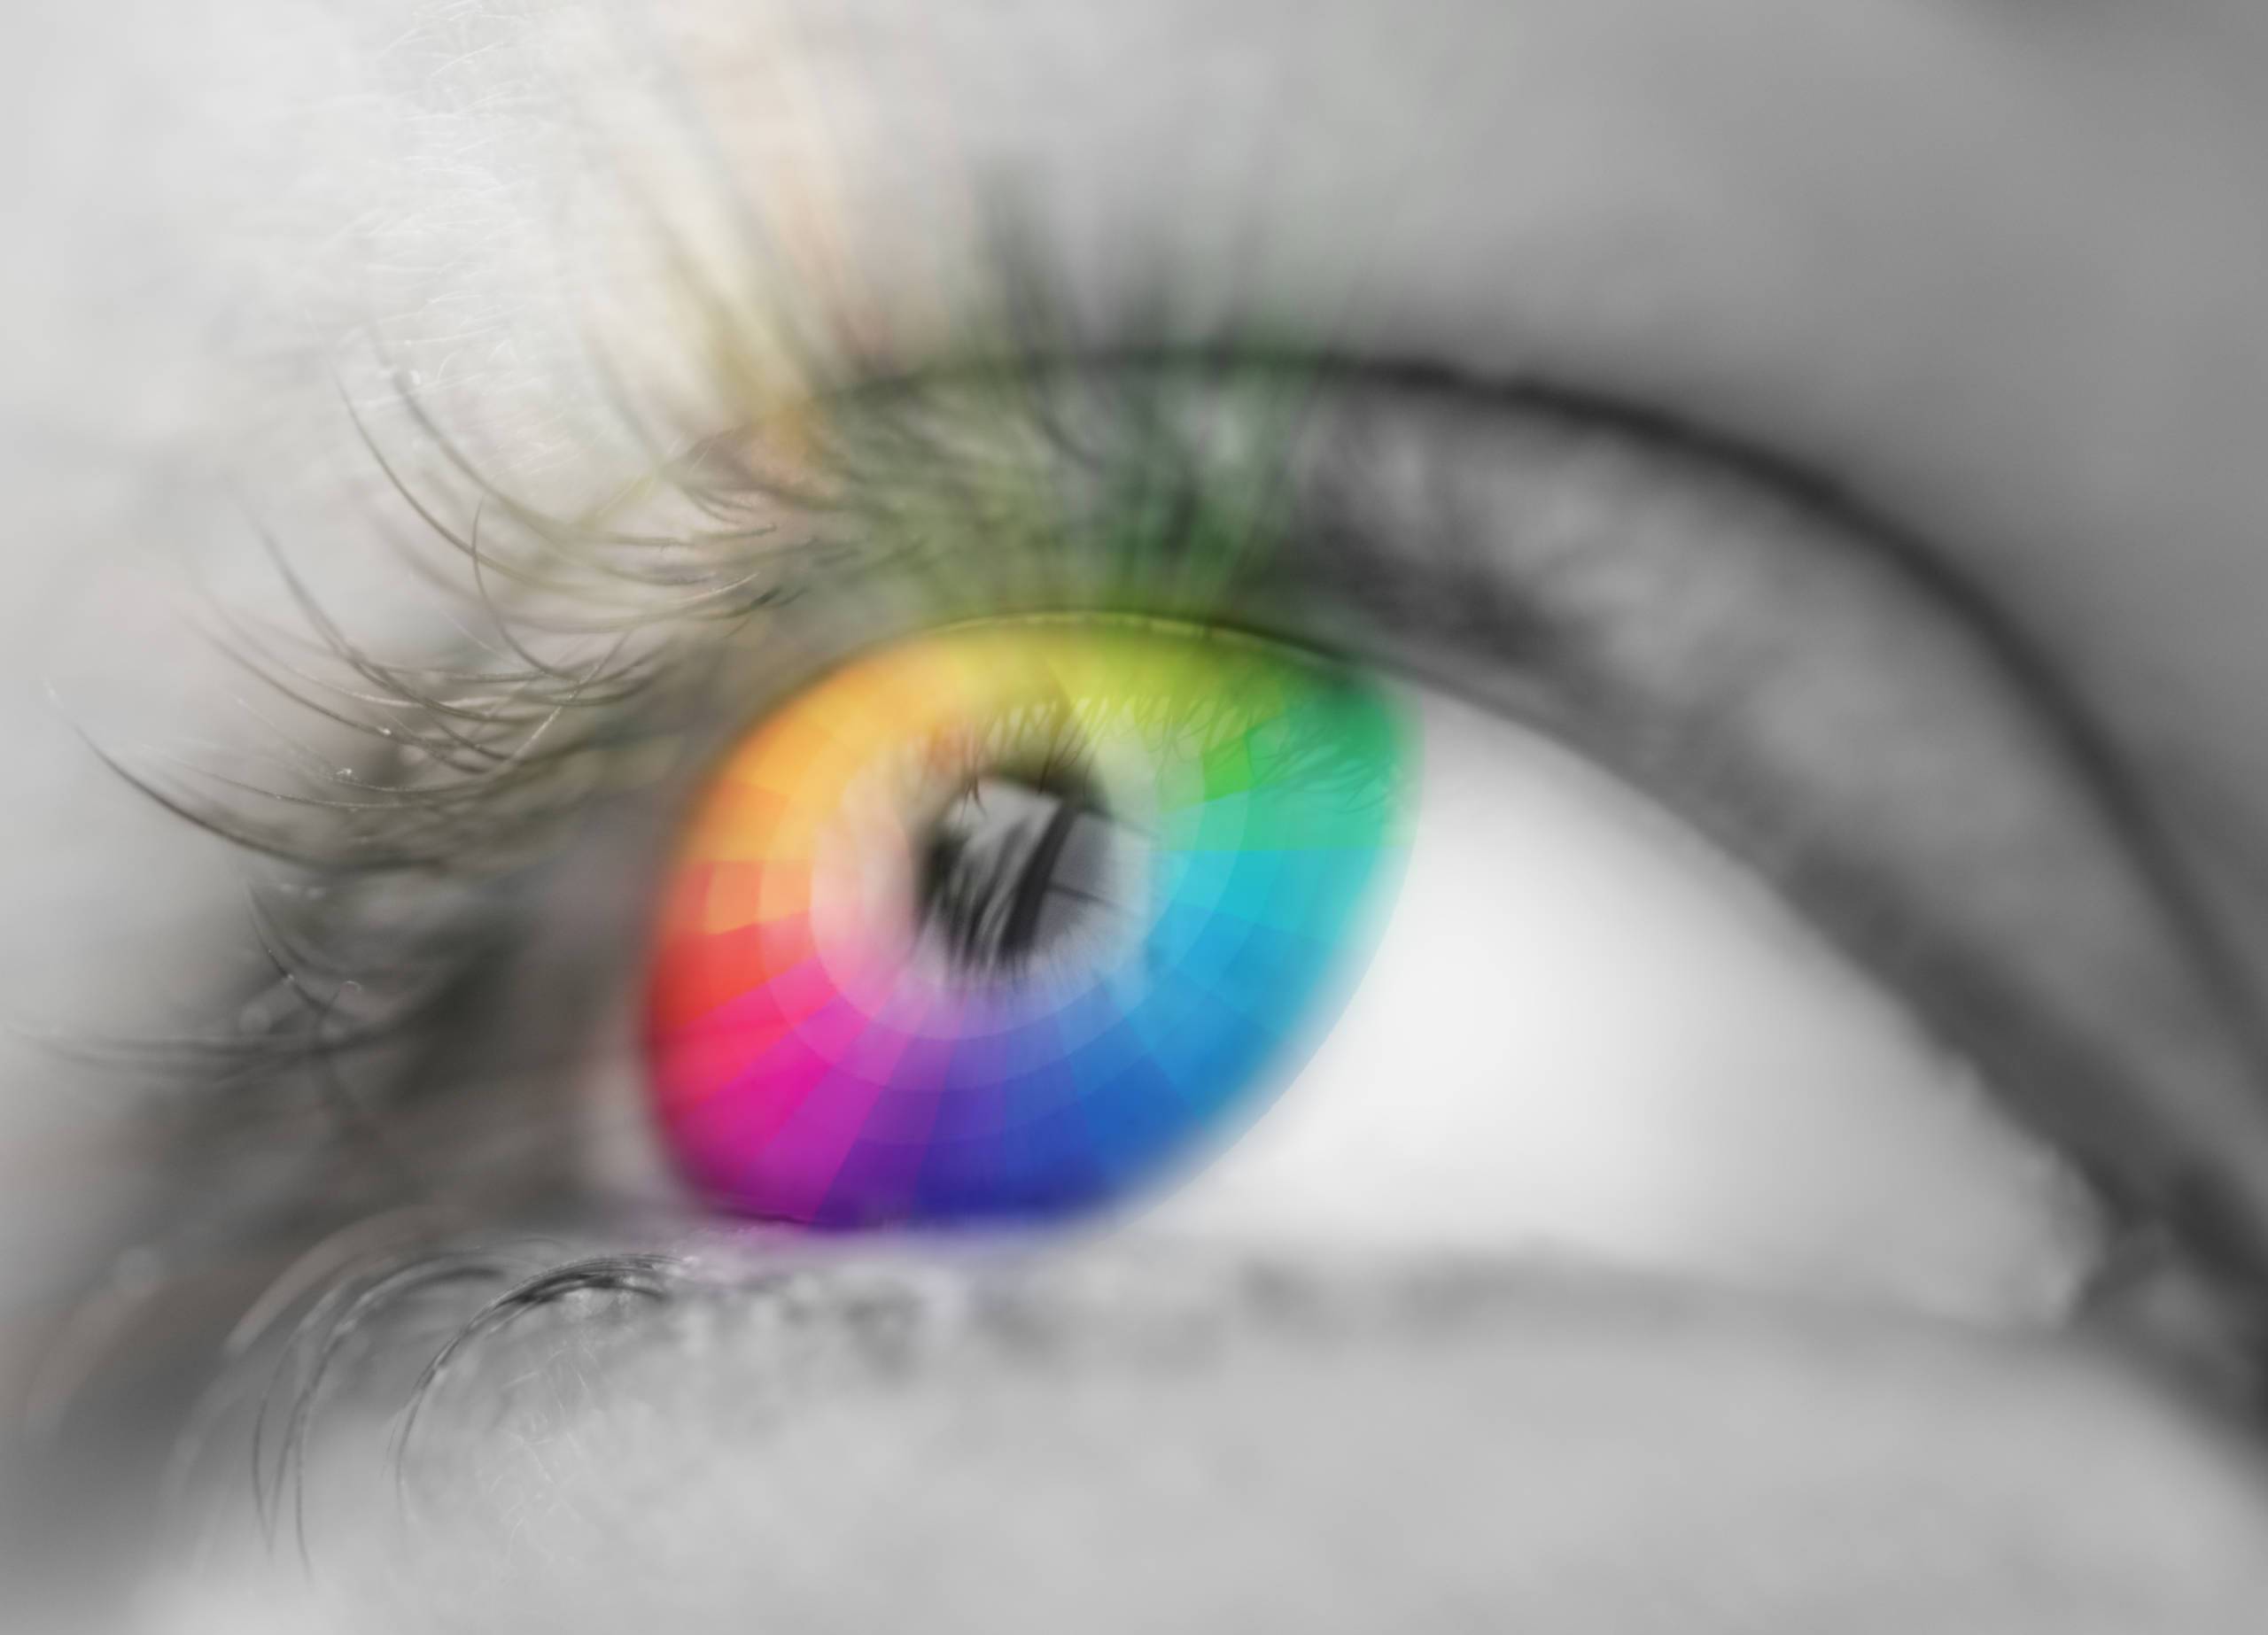 The eye perceives more colors than what can be printed